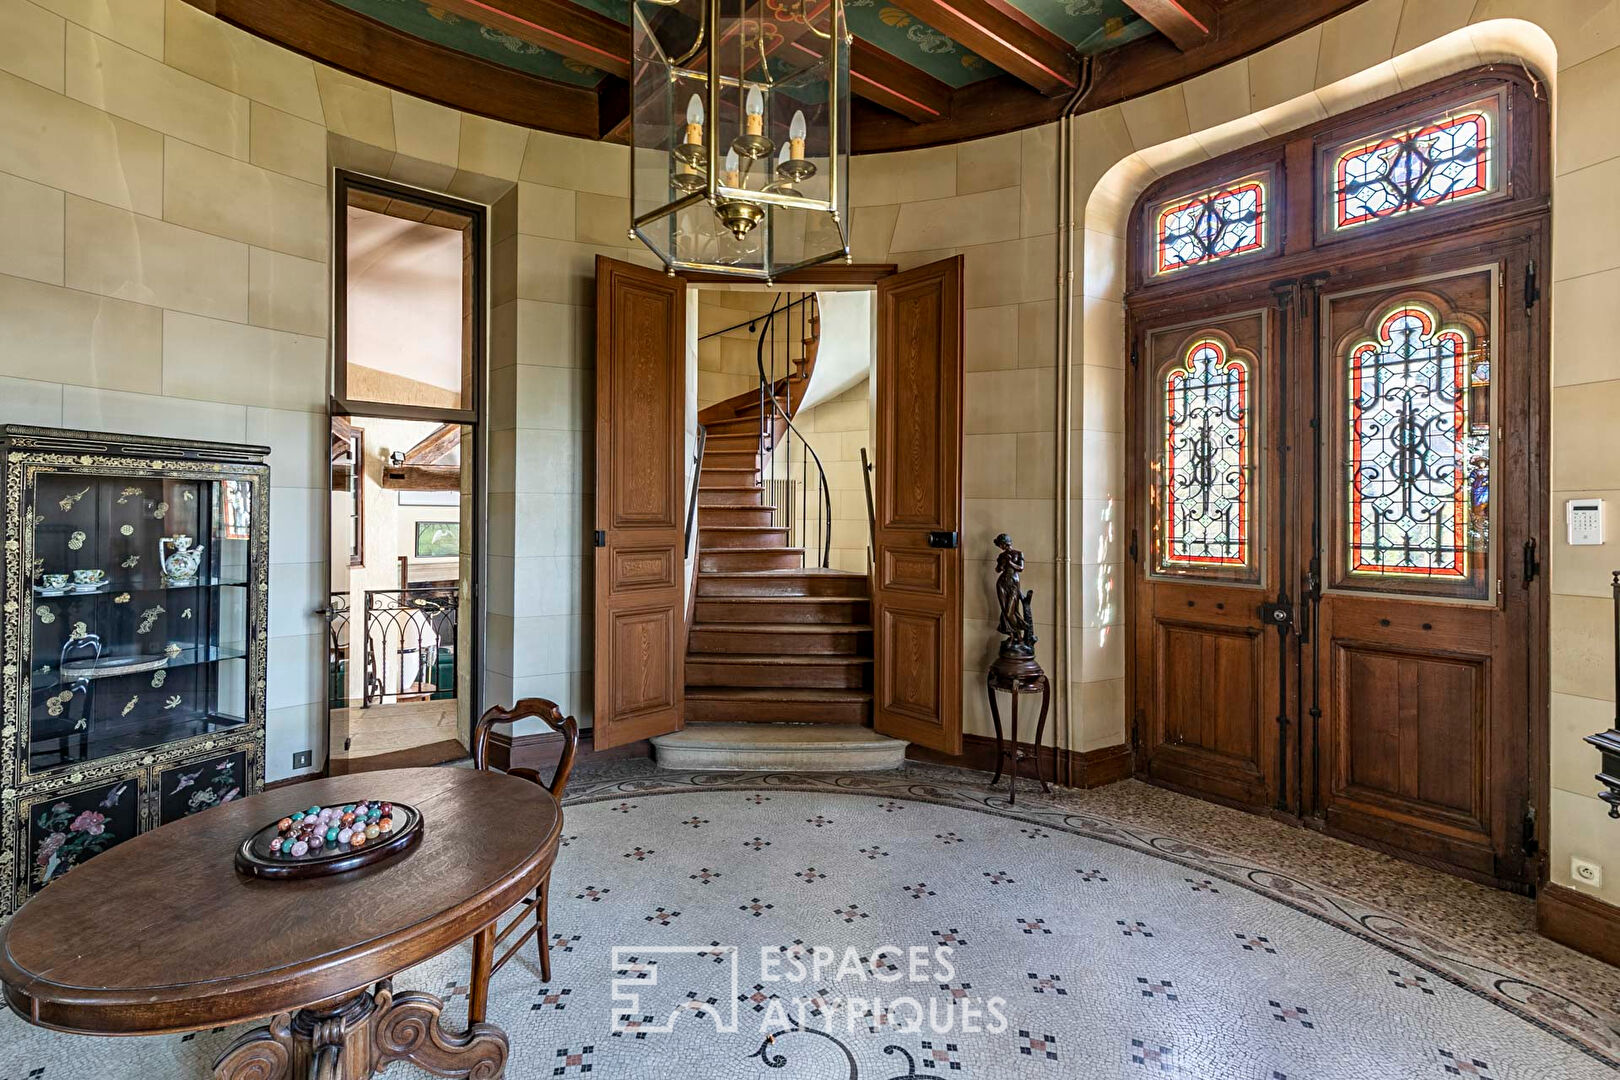 Mansion with a neo-Gothic style tower offering a panoramic view of Plessis-Robinson